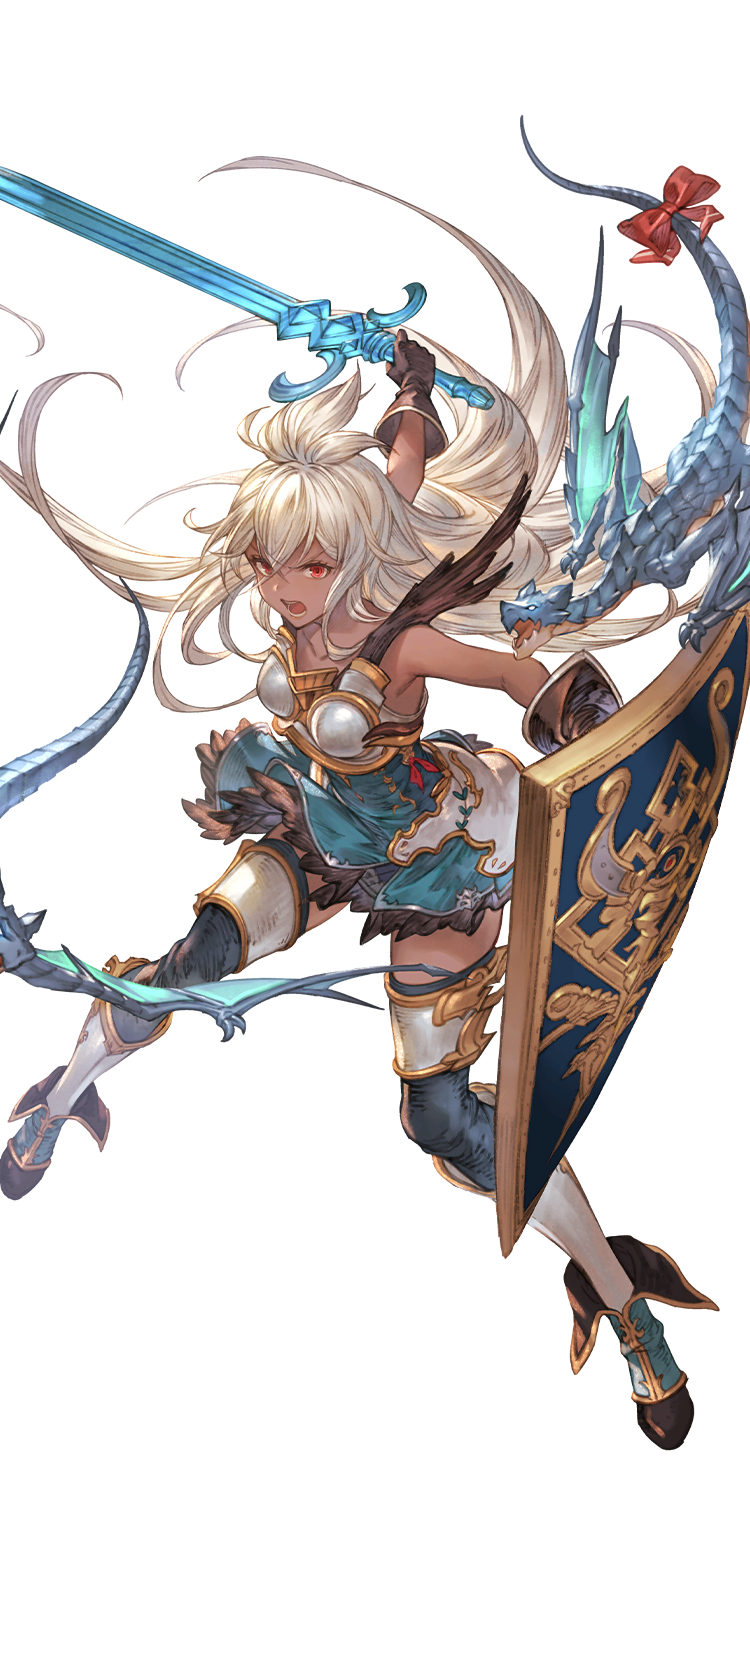 Zooey From Granblue Fantasy Versus Rising by EC1992 on DeviantArt